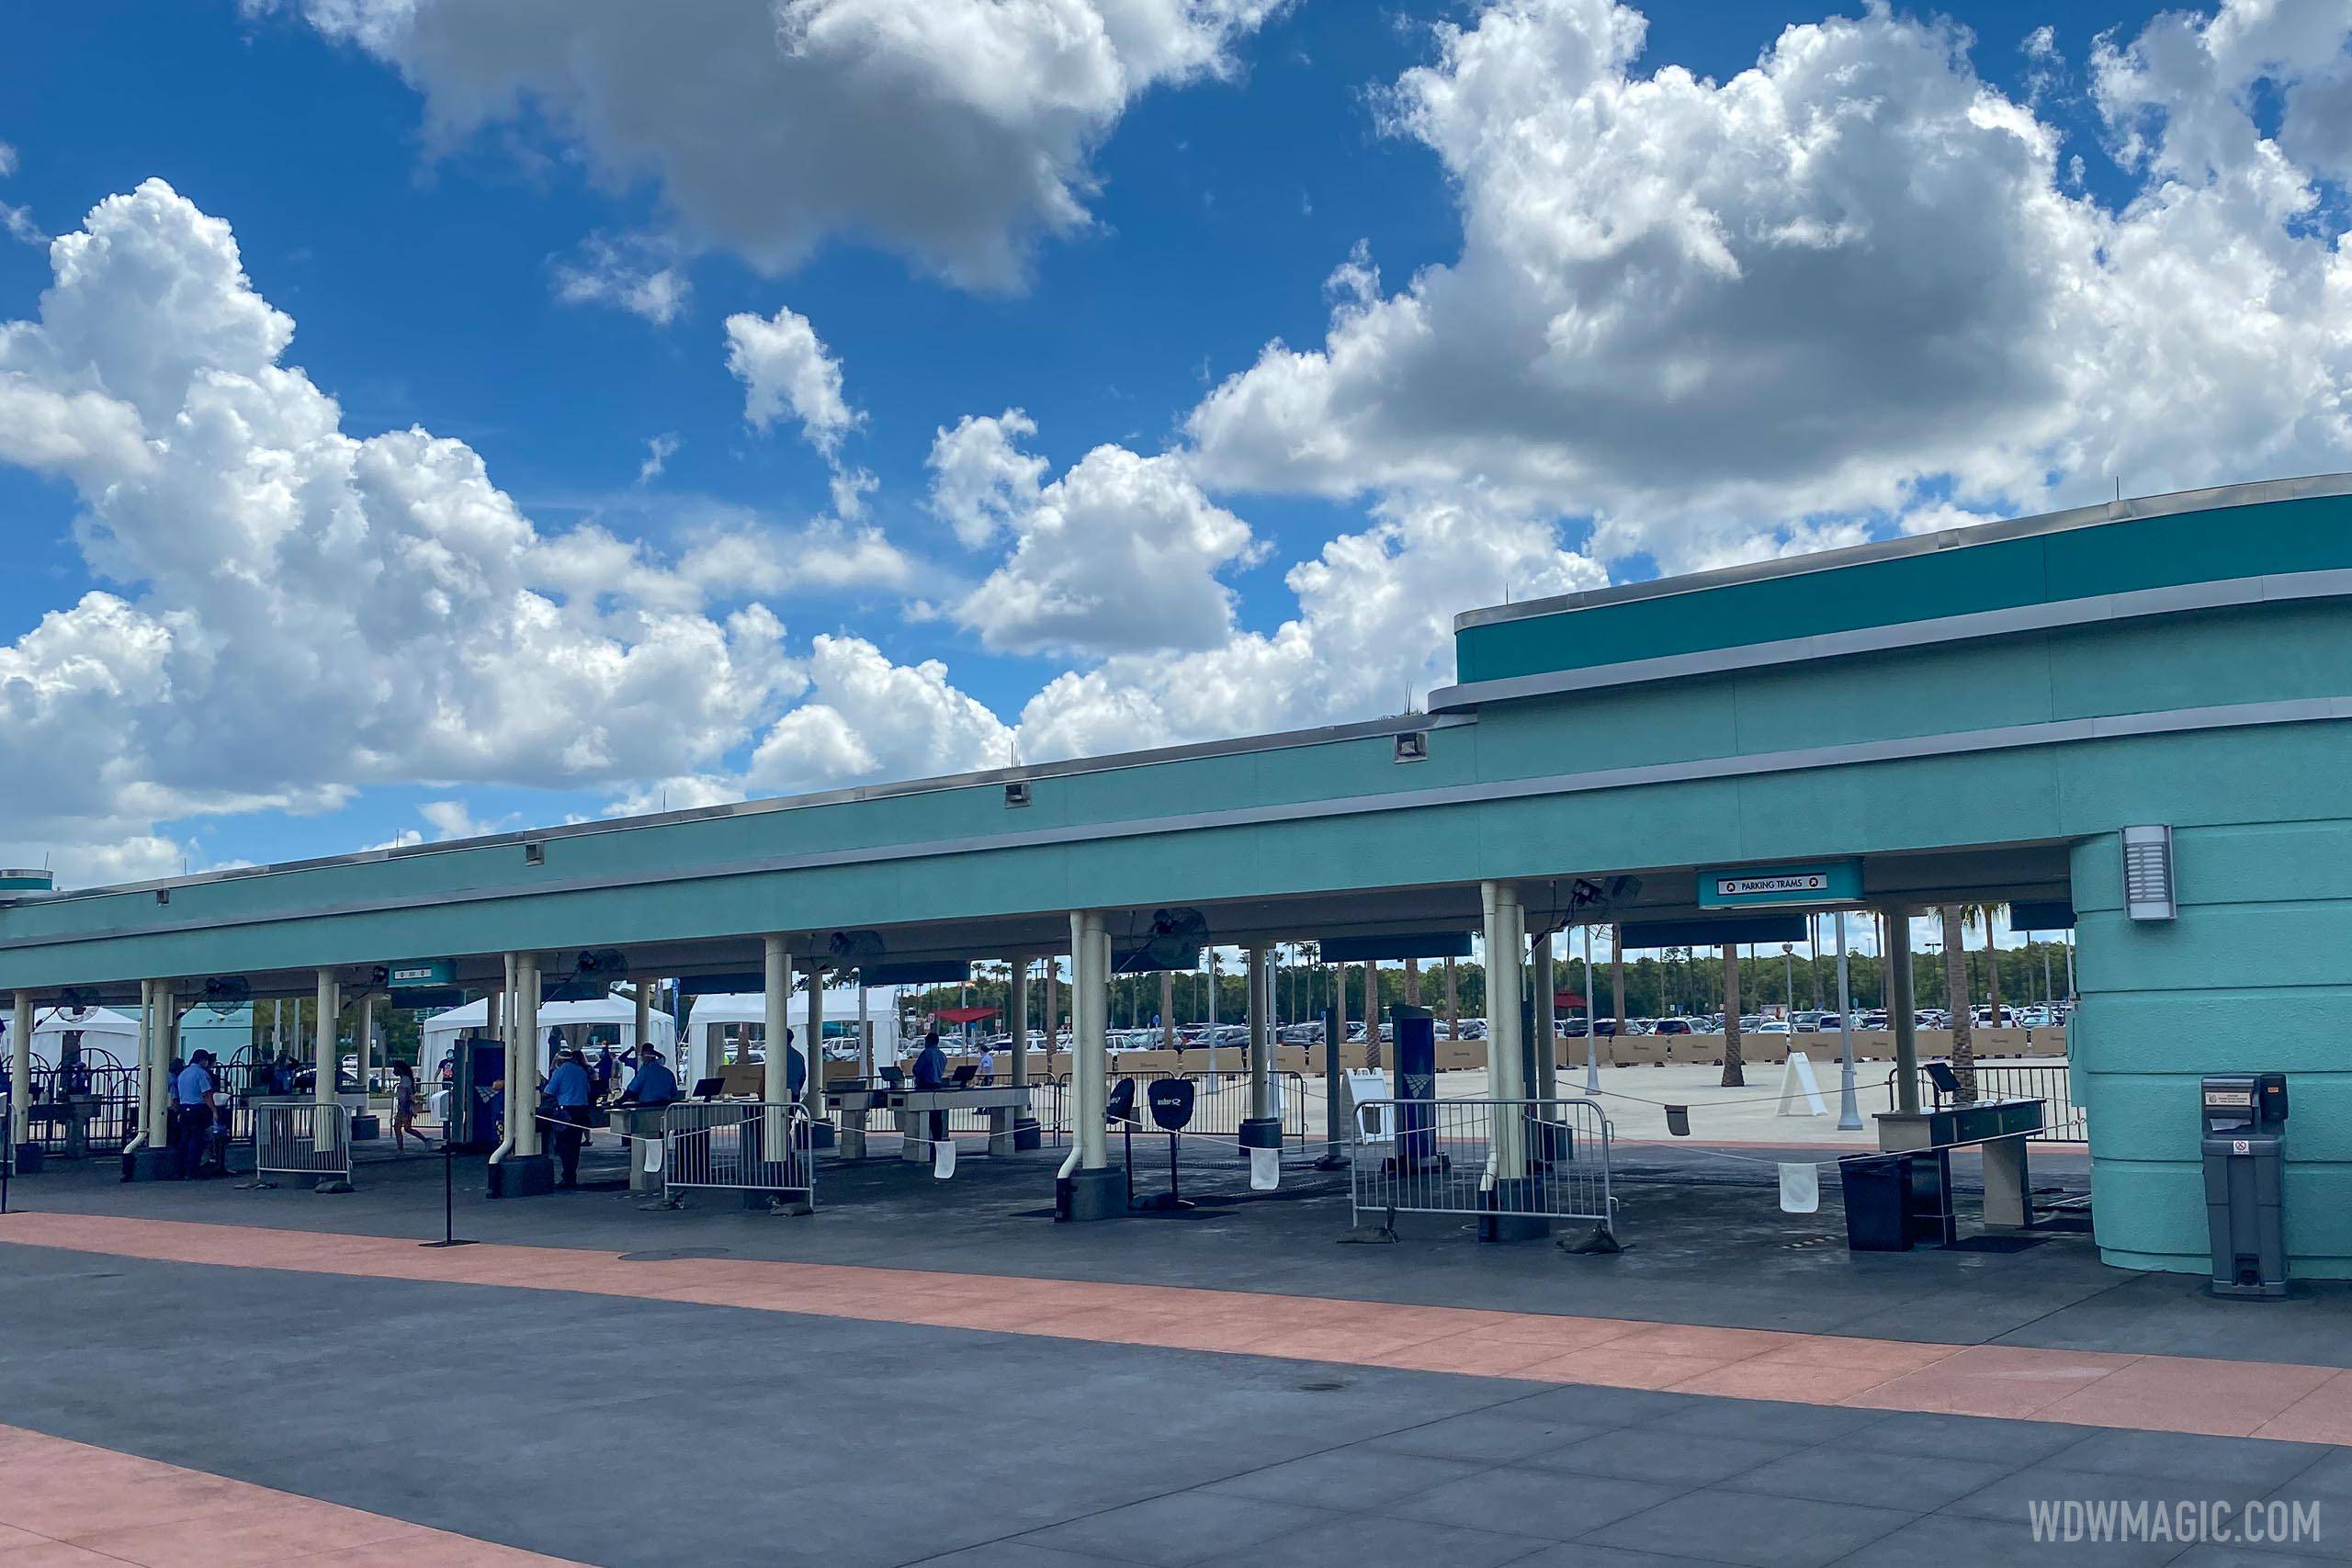 New non-stop walkthrough security scanners come to Disney's Hollywood Studios